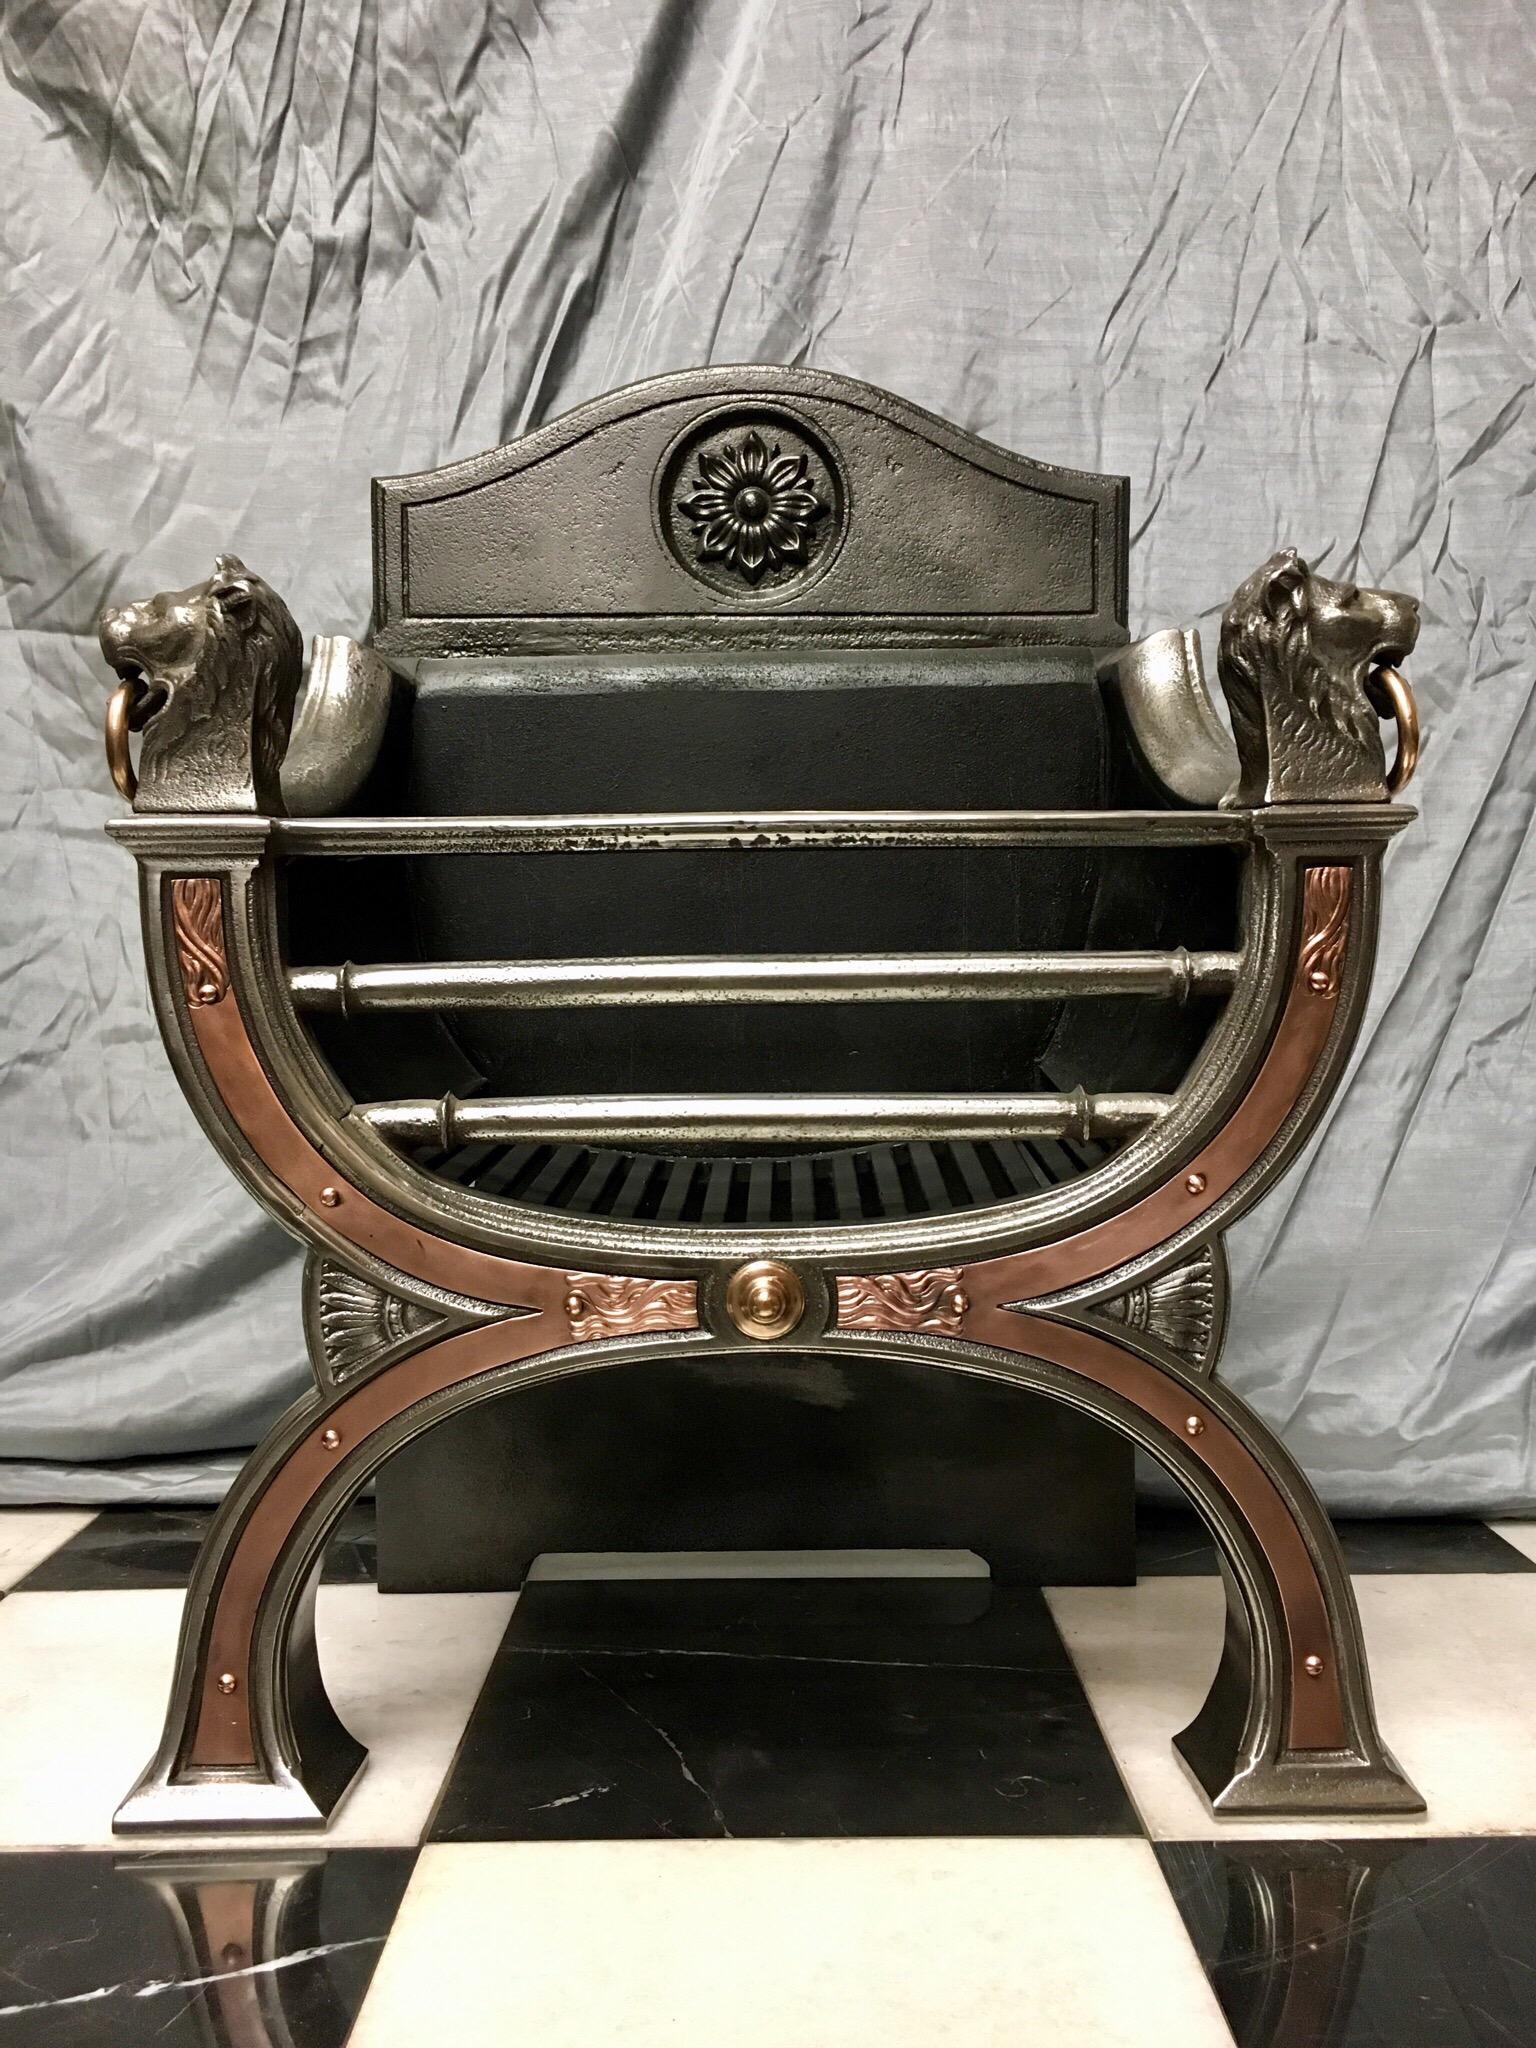 An elegant Regency style polished cast iron fire grate. A three bar arch front with bronze repousse inlays, mounted with a pair of grand lion masks holding bronze rings in their mouths, the shaped high back plate with a central stylized sunflower,